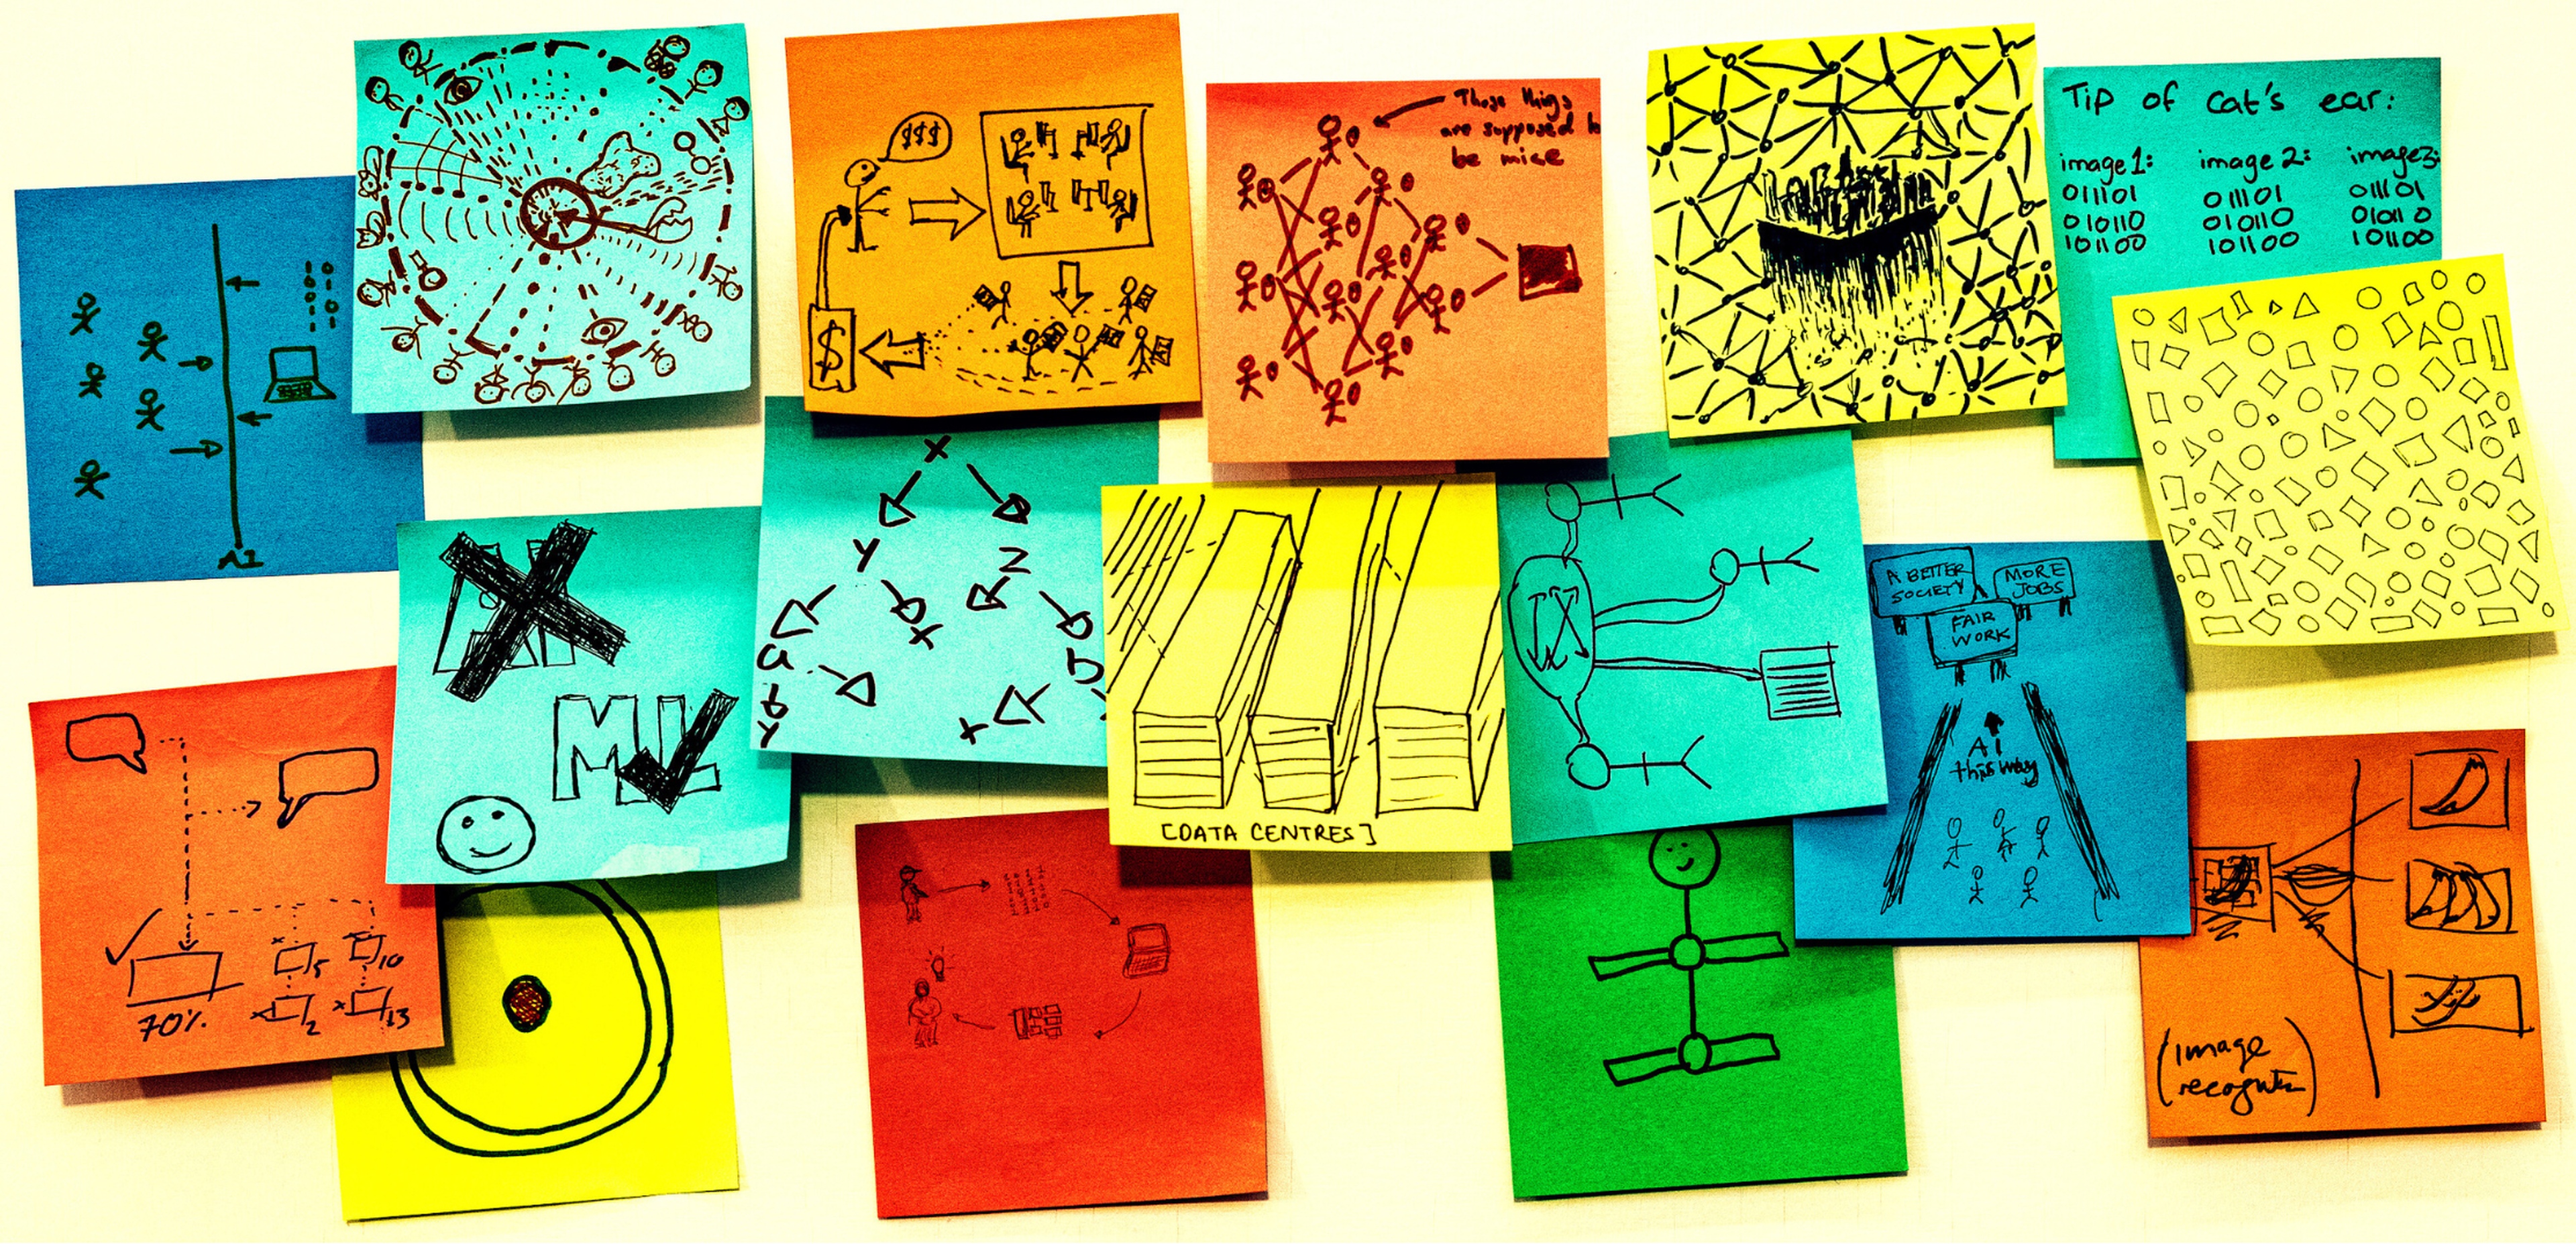 Seventeen multicoloured post-it notes are roughly positioned in a strip shape on a white board. Each one of them has a hand drawn sketch in pen on them, answering the prompt on one of the post-it notes "AI is...." The sketches are all very different, some are patterns representing data, some are cartoons, some show drawings of things like data centres, or stick figure drawings of the people involved.